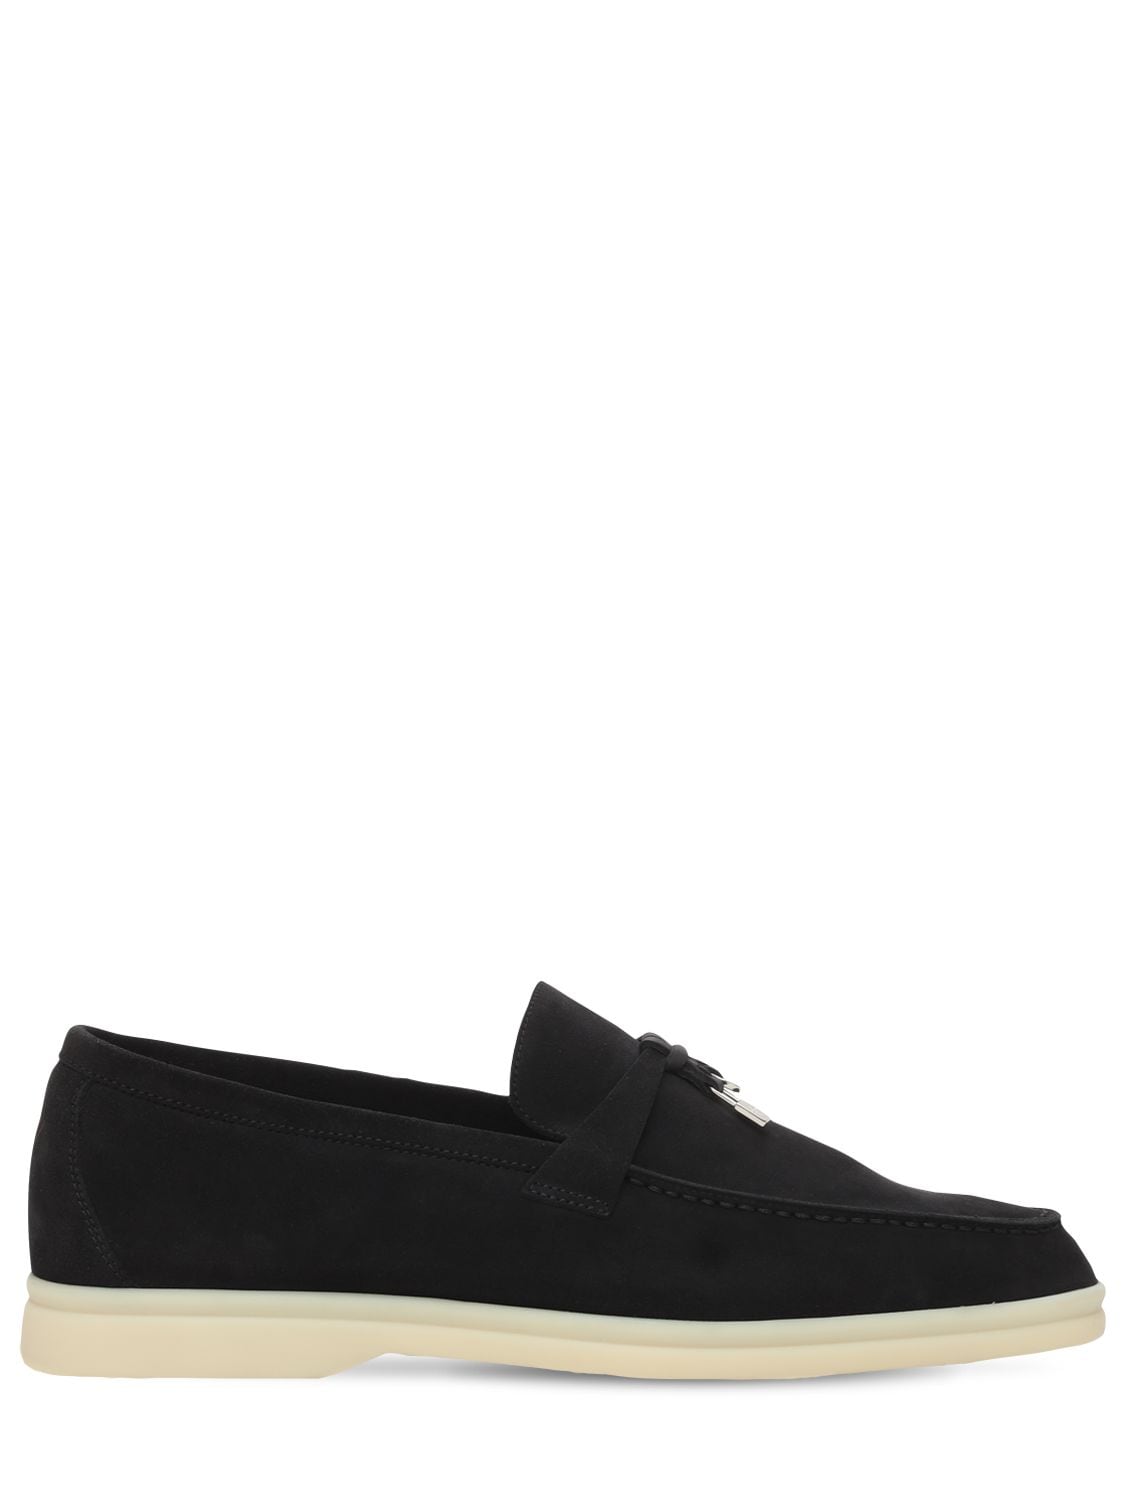 Loro Piana 10mm Summer Charms Walk Suede Loafers In Black